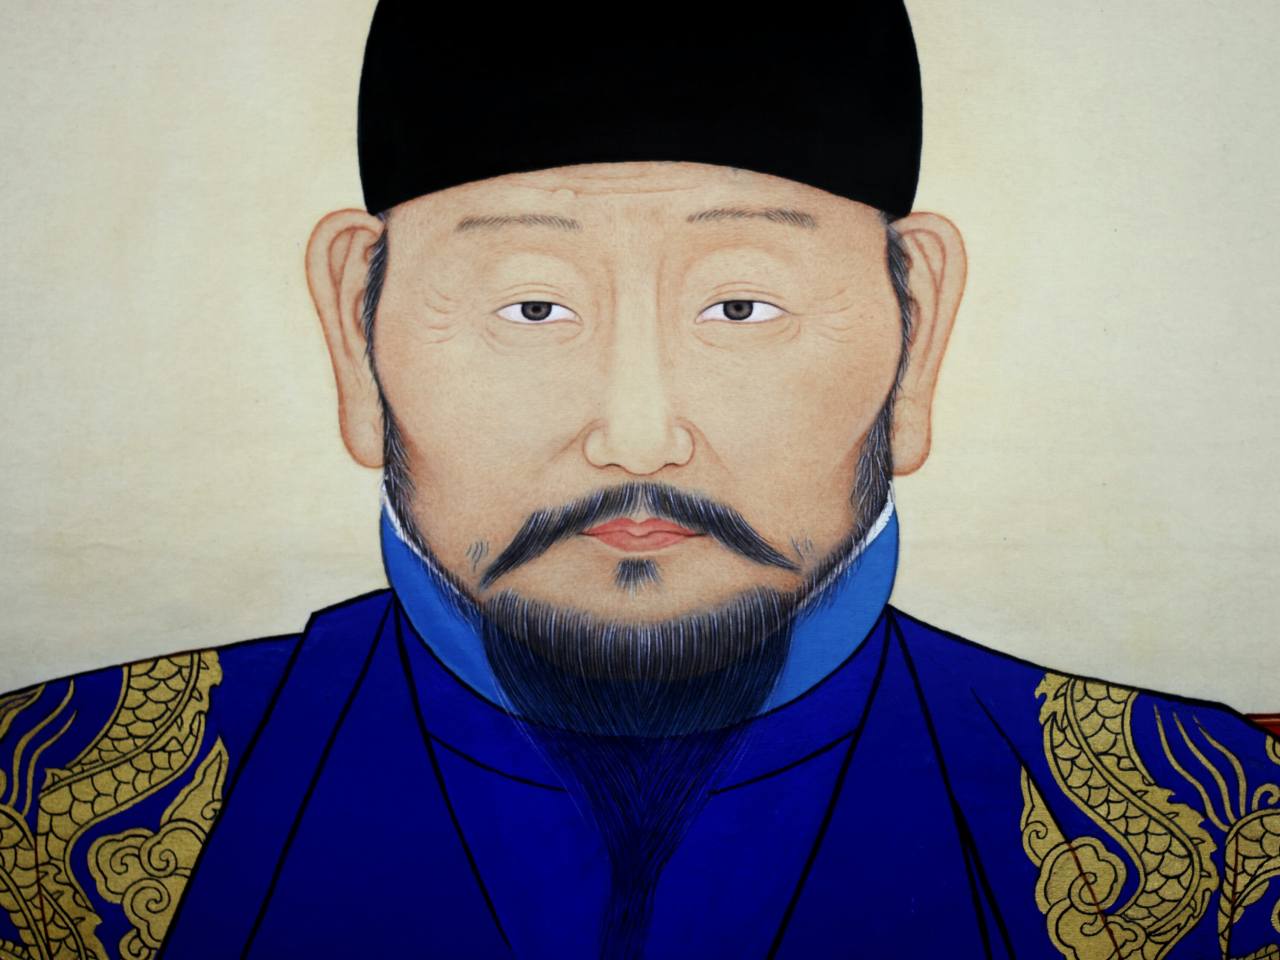 This portrait of a young Yi Seong-gye is a painting by artist Kwon Oh-chang based on a 1911 photograph of the original portrait. (Hyungwon Kang)